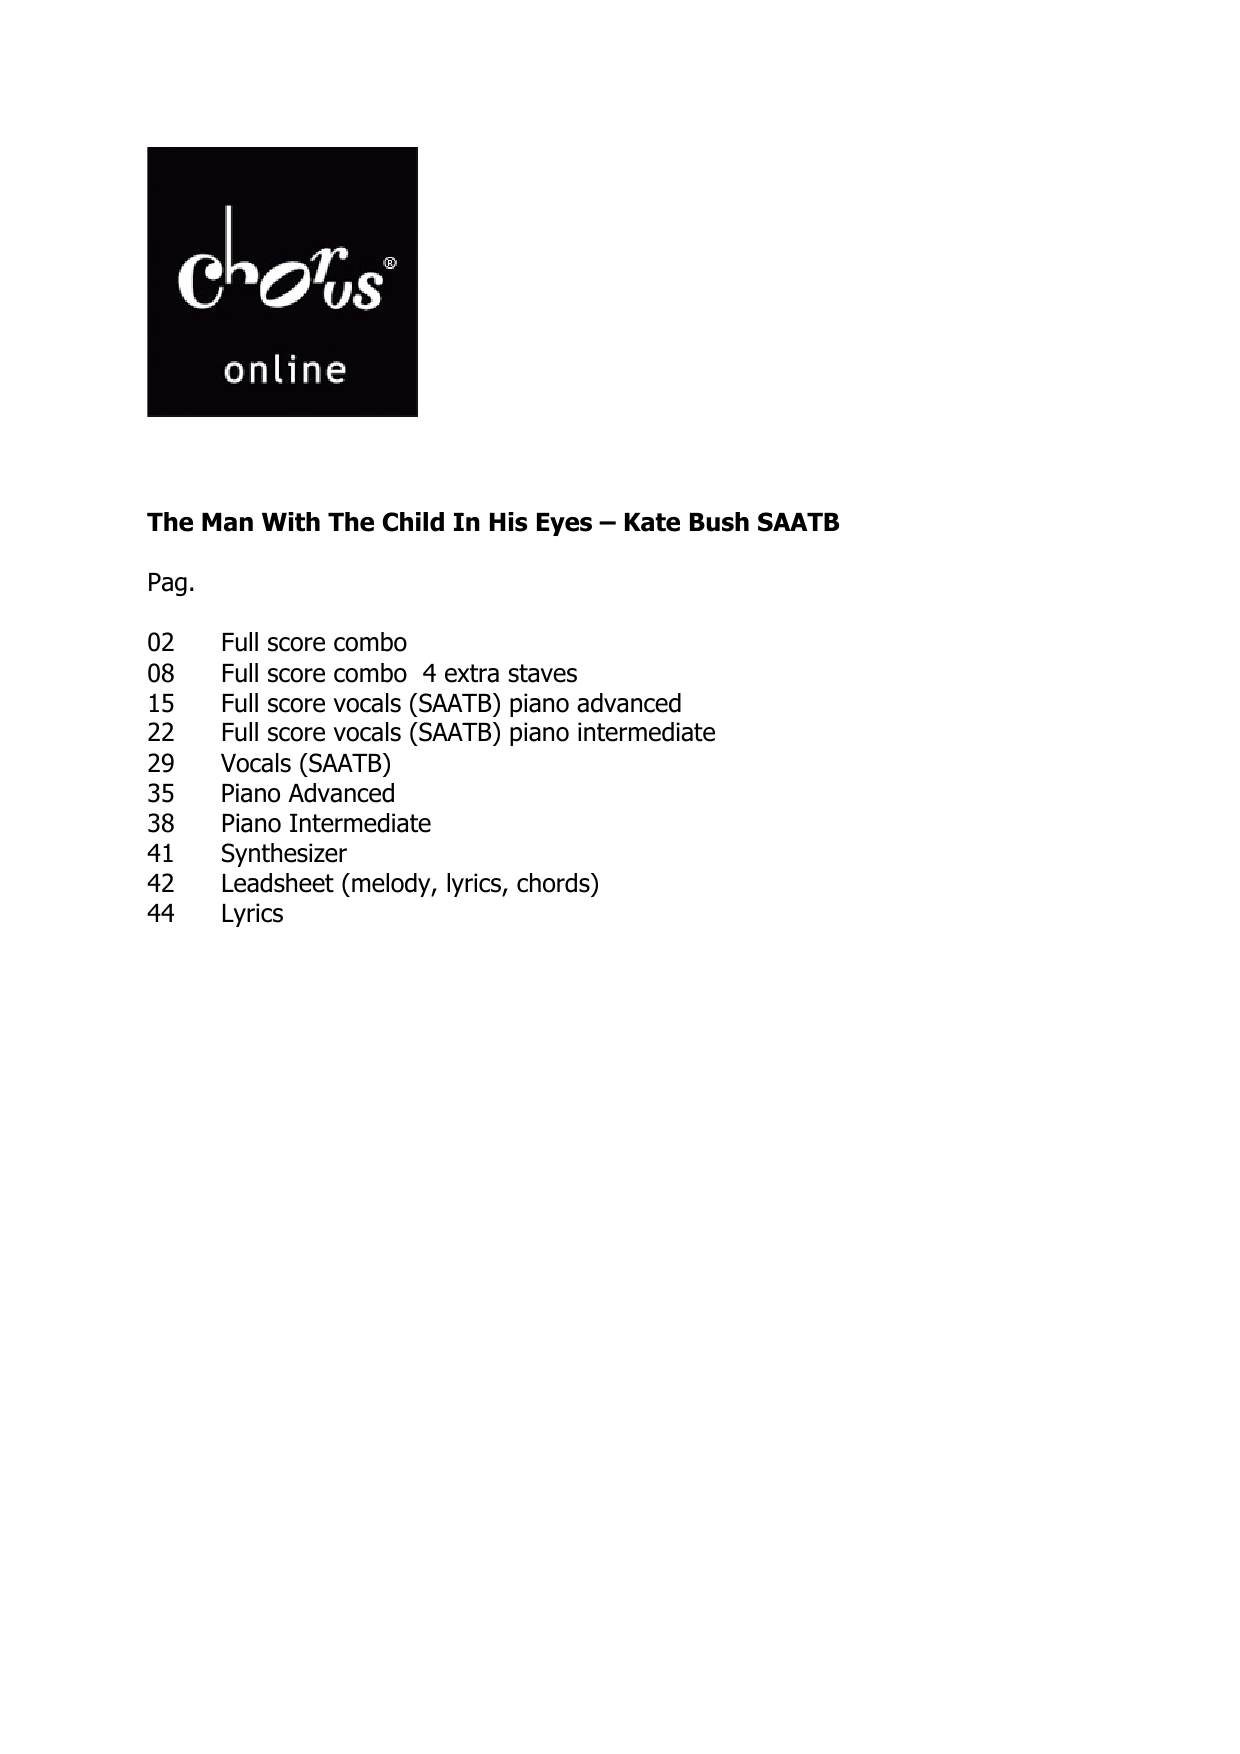 Kate Bush The Man With The Child In His Eyes (arr. Hans Kaldeway) sheet music notes printable PDF score